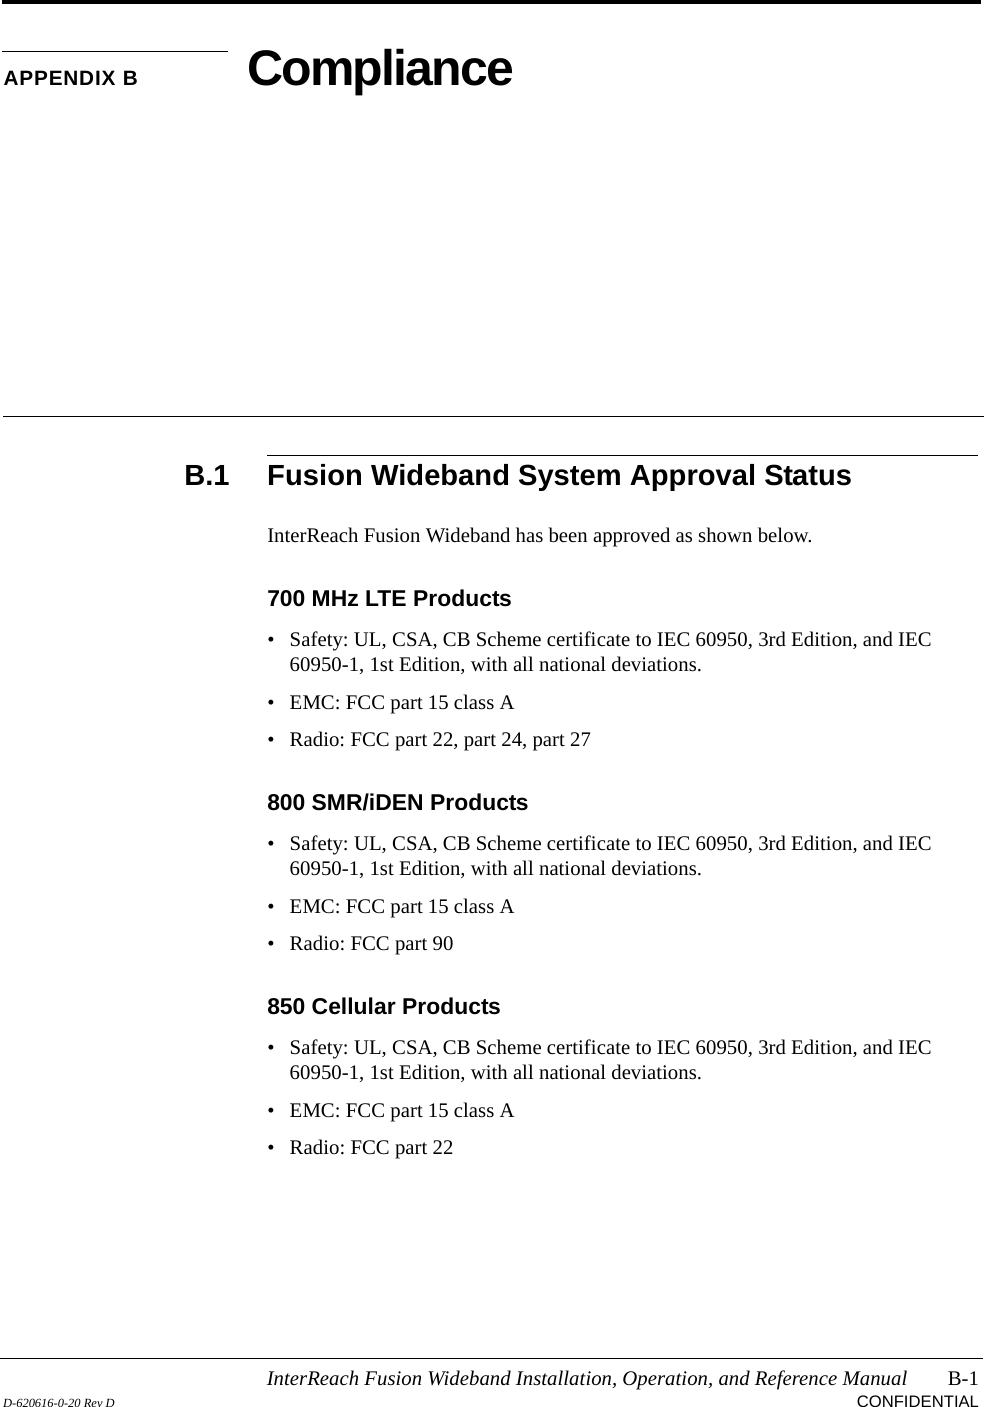 InterReach Fusion Wideband Installation, Operation, and Reference Manual B-1D-620616-0-20 Rev D CONFIDENTIALAPPENDIX B ComplianceB.1 Fusion Wideband System Approval StatusInterReach Fusion Wideband has been approved as shown below.700 MHz LTE Products• Safety: UL, CSA, CB Scheme certificate to IEC 60950, 3rd Edition, and IEC 60950-1, 1st Edition, with all national deviations.• EMC: FCC part 15 class A• Radio: FCC part 22, part 24, part 27800 SMR/iDEN Products• Safety: UL, CSA, CB Scheme certificate to IEC 60950, 3rd Edition, and IEC 60950-1, 1st Edition, with all national deviations.• EMC: FCC part 15 class A• Radio: FCC part 90850 Cellular Products• Safety: UL, CSA, CB Scheme certificate to IEC 60950, 3rd Edition, and IEC 60950-1, 1st Edition, with all national deviations.• EMC: FCC part 15 class A• Radio: FCC part 22